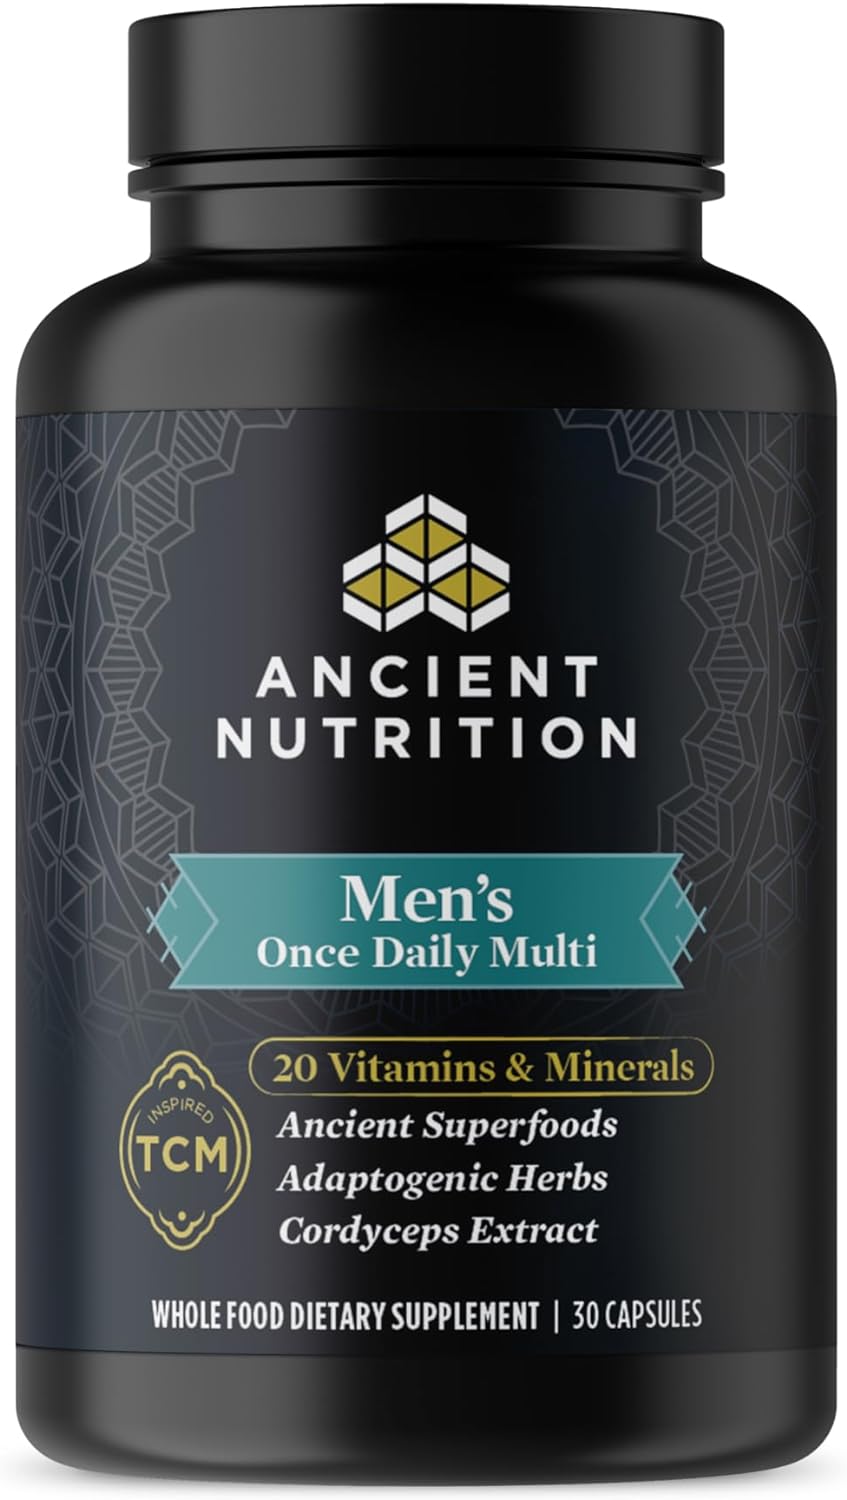 Multivitamin for Men by Ancient Nutrition, Ancient Multi Mens Once Daily Vitamin Supplement 30 Ct, Vitamin A, Vitamin B and Vitamin K2, Fenugreek Seed, Supports Immune System, Paleo and Keto Friendly